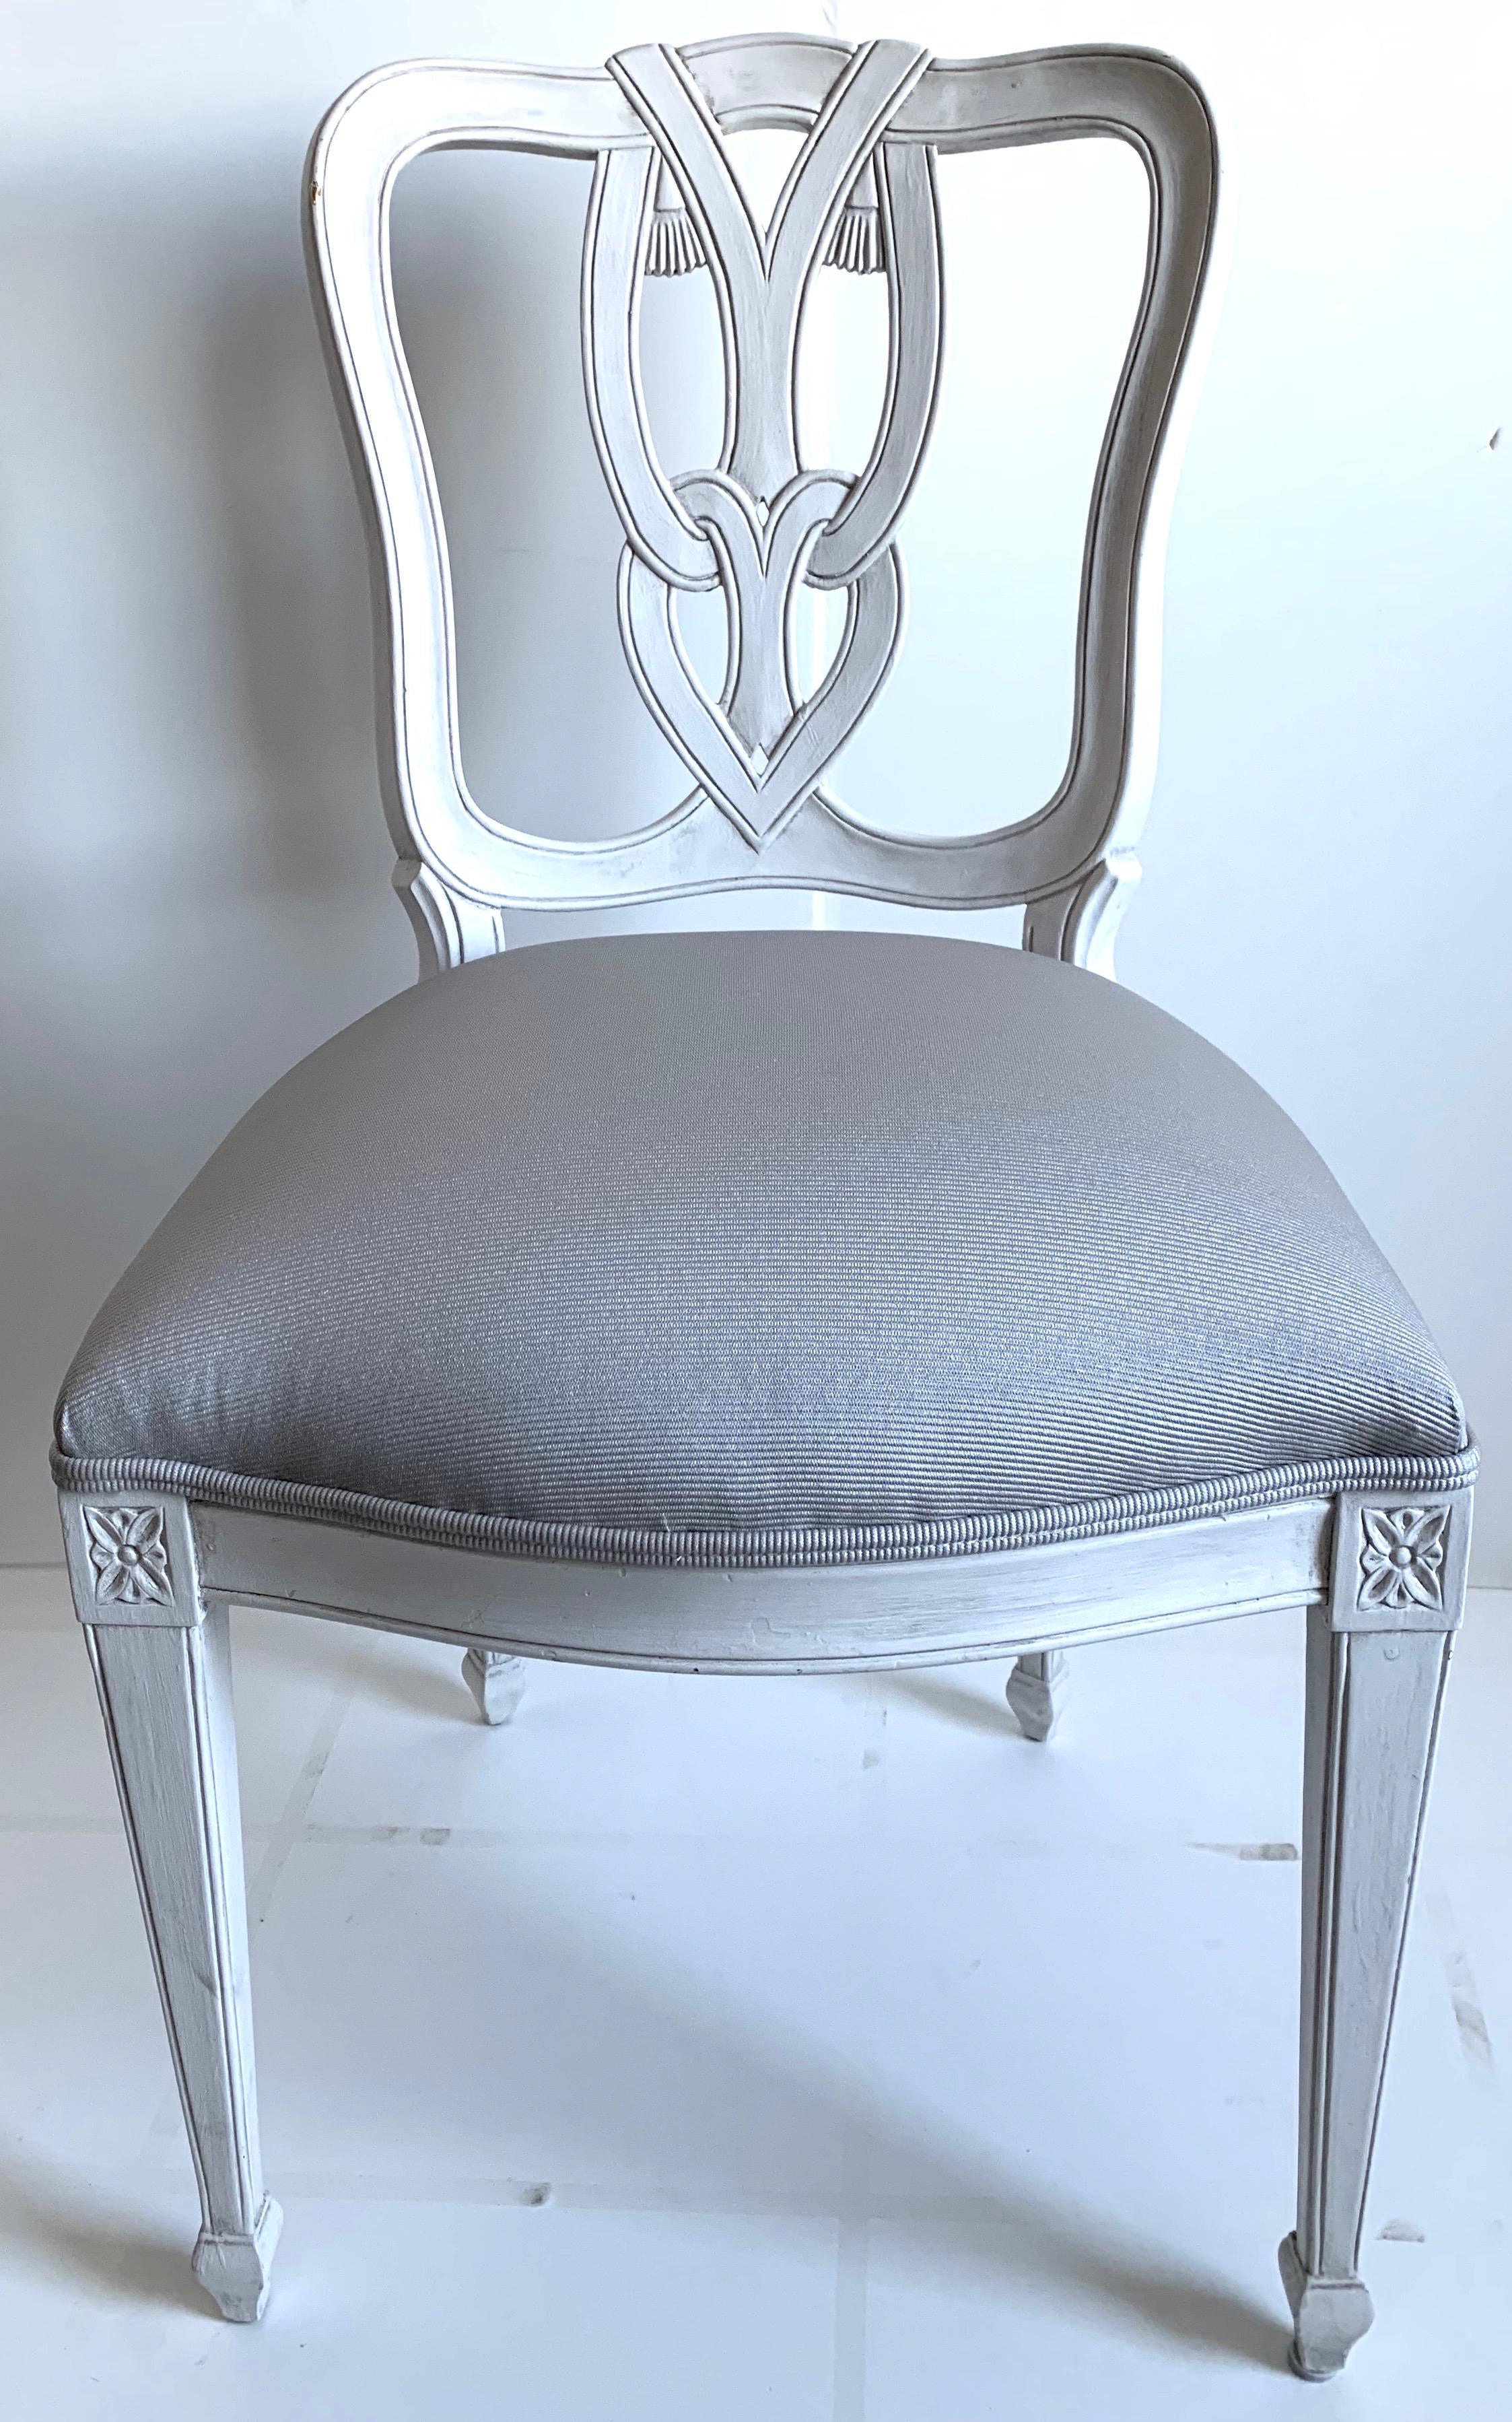 Pair of Hollywood Regency style side chairs. Newly repainted in antique white painted finish. Newly upholstered in Schumacher woven fabric in light gray. Measures: Seat 18